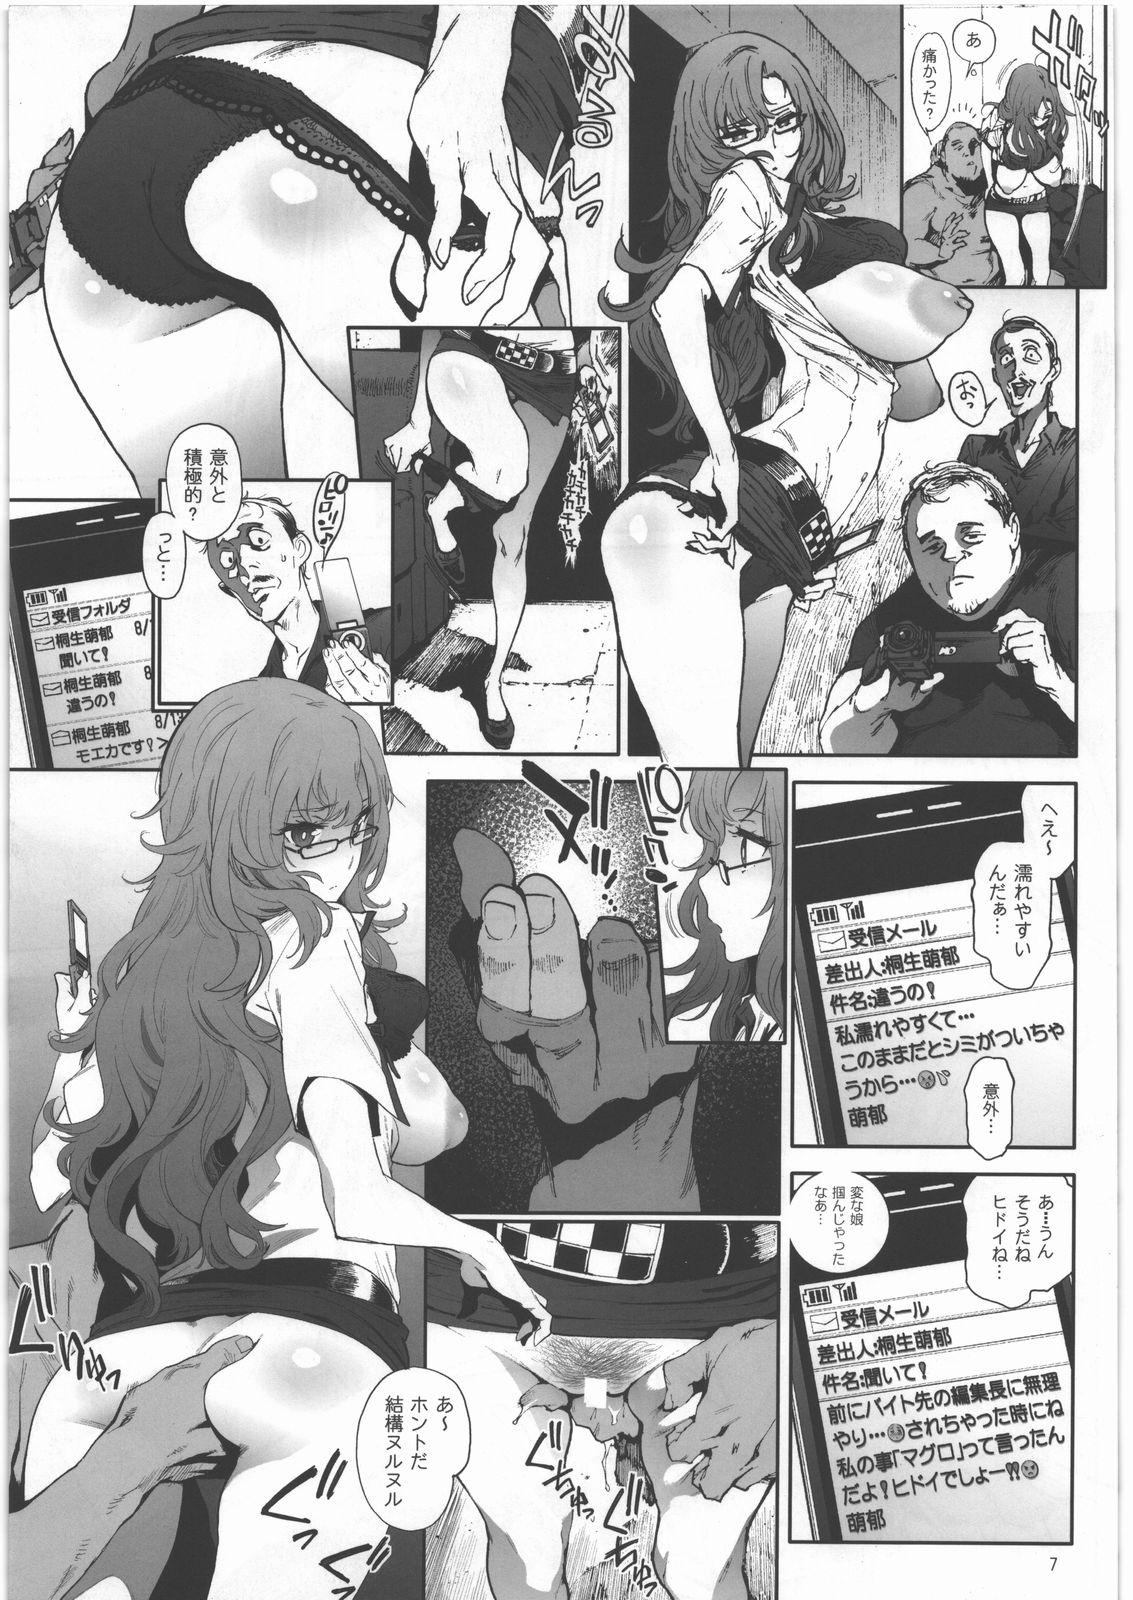 Titties Moeka's Gate - Steinsgate Consolo - Page 6